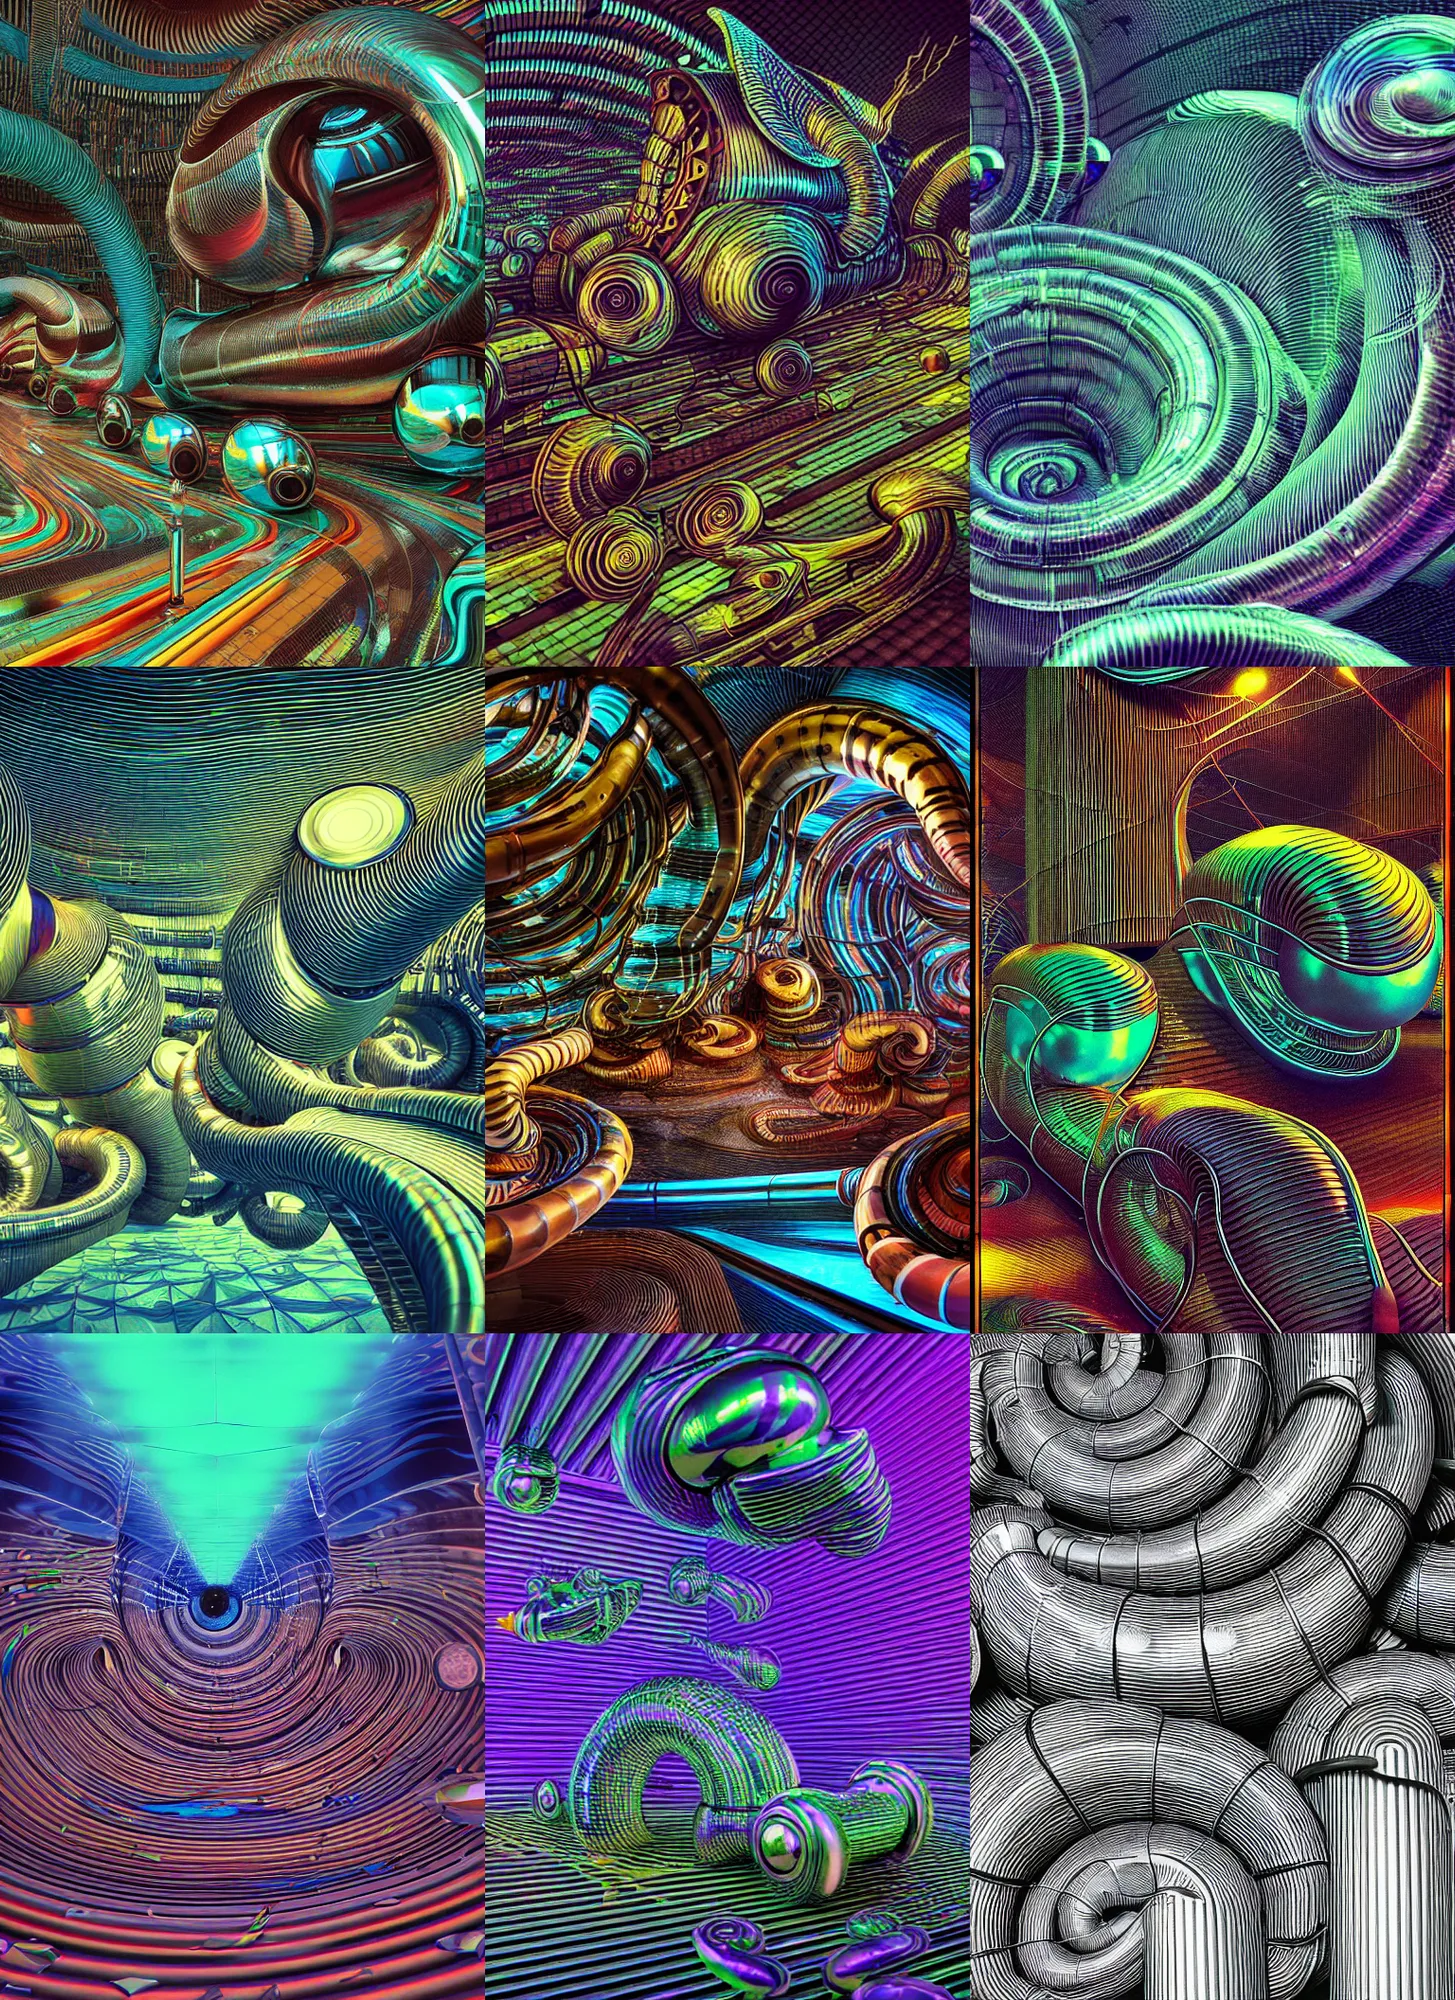 Prompt: scanlines supersede slick chrome grandfather clocks flowing ((hans thoma)) caustically (((beeple))) between giant snails of phantasmagorical corrugated pipe people that drift and dance to dropped beats and mashed pot pits